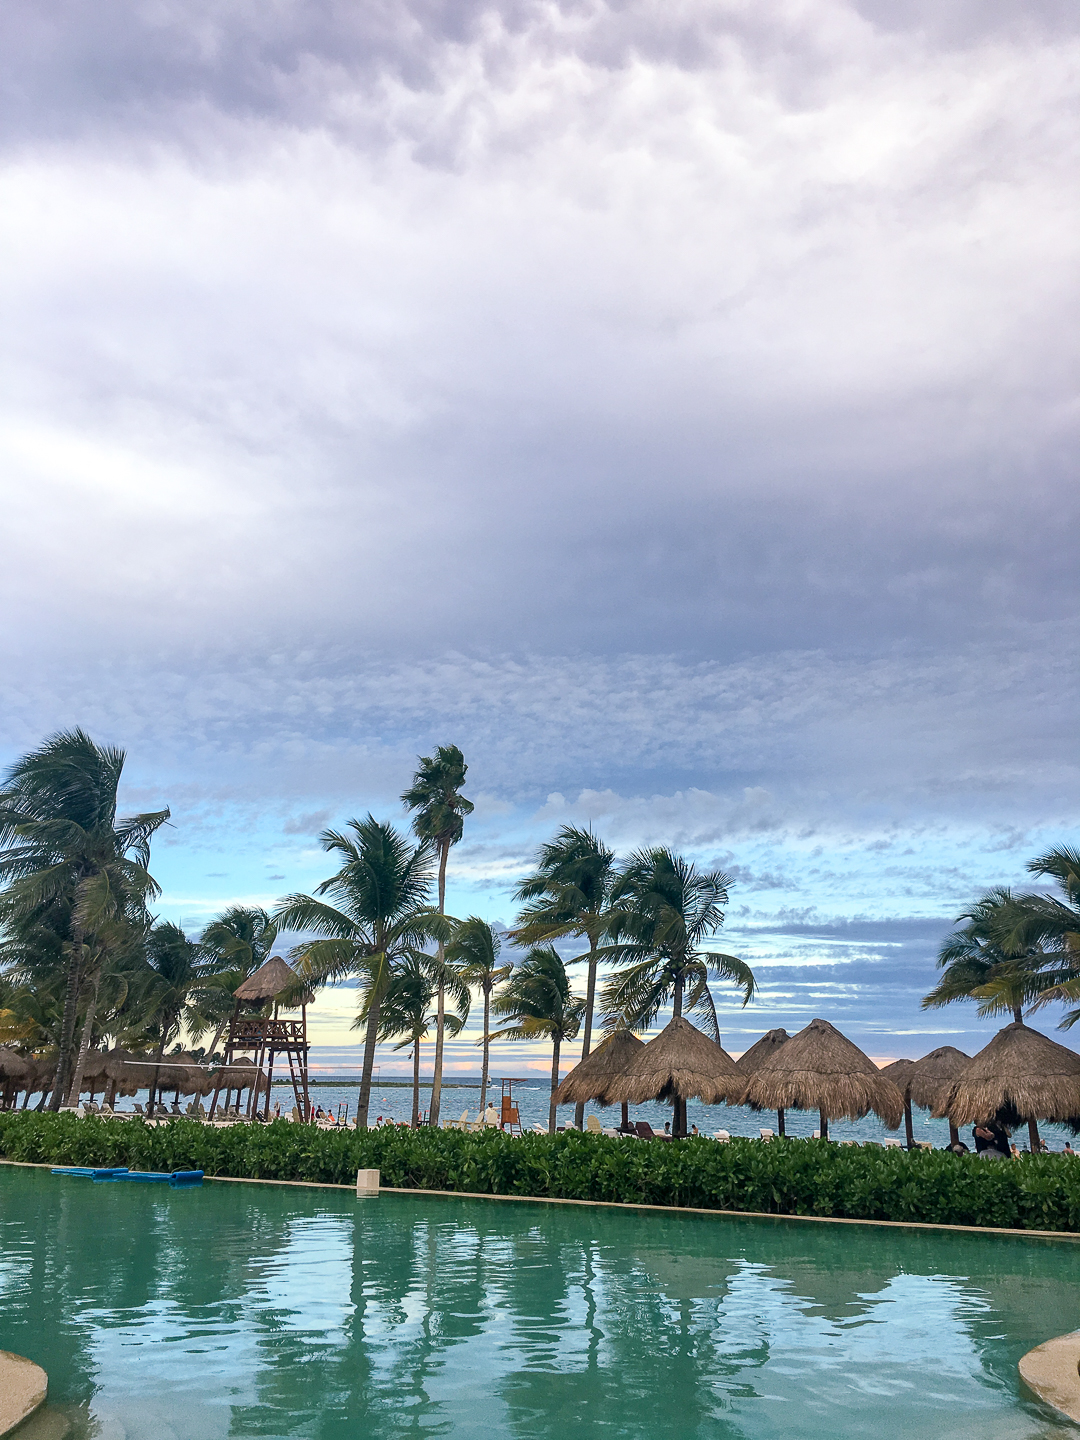 best all-inclusive resort in mexico - Secrets Akumal Riviera Maya -by popular Chicago travel blogger Visions of Vogue